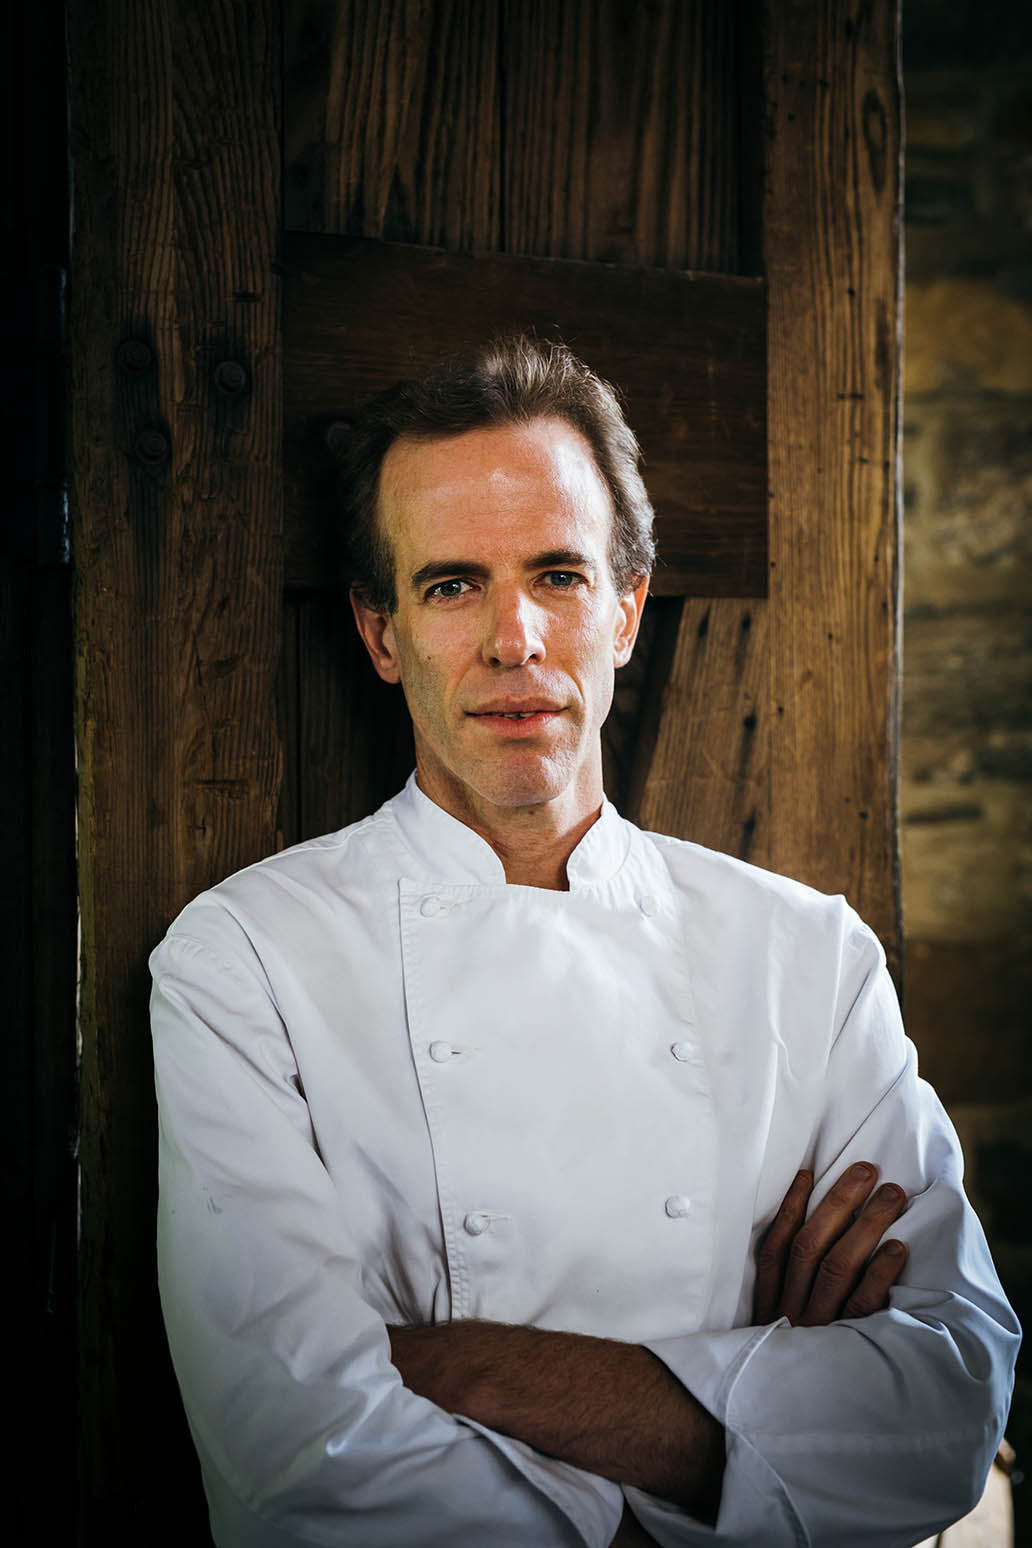 Dan Barber is the executive chef and owner of Blue Hill and Blue Hill at Stone Barns.